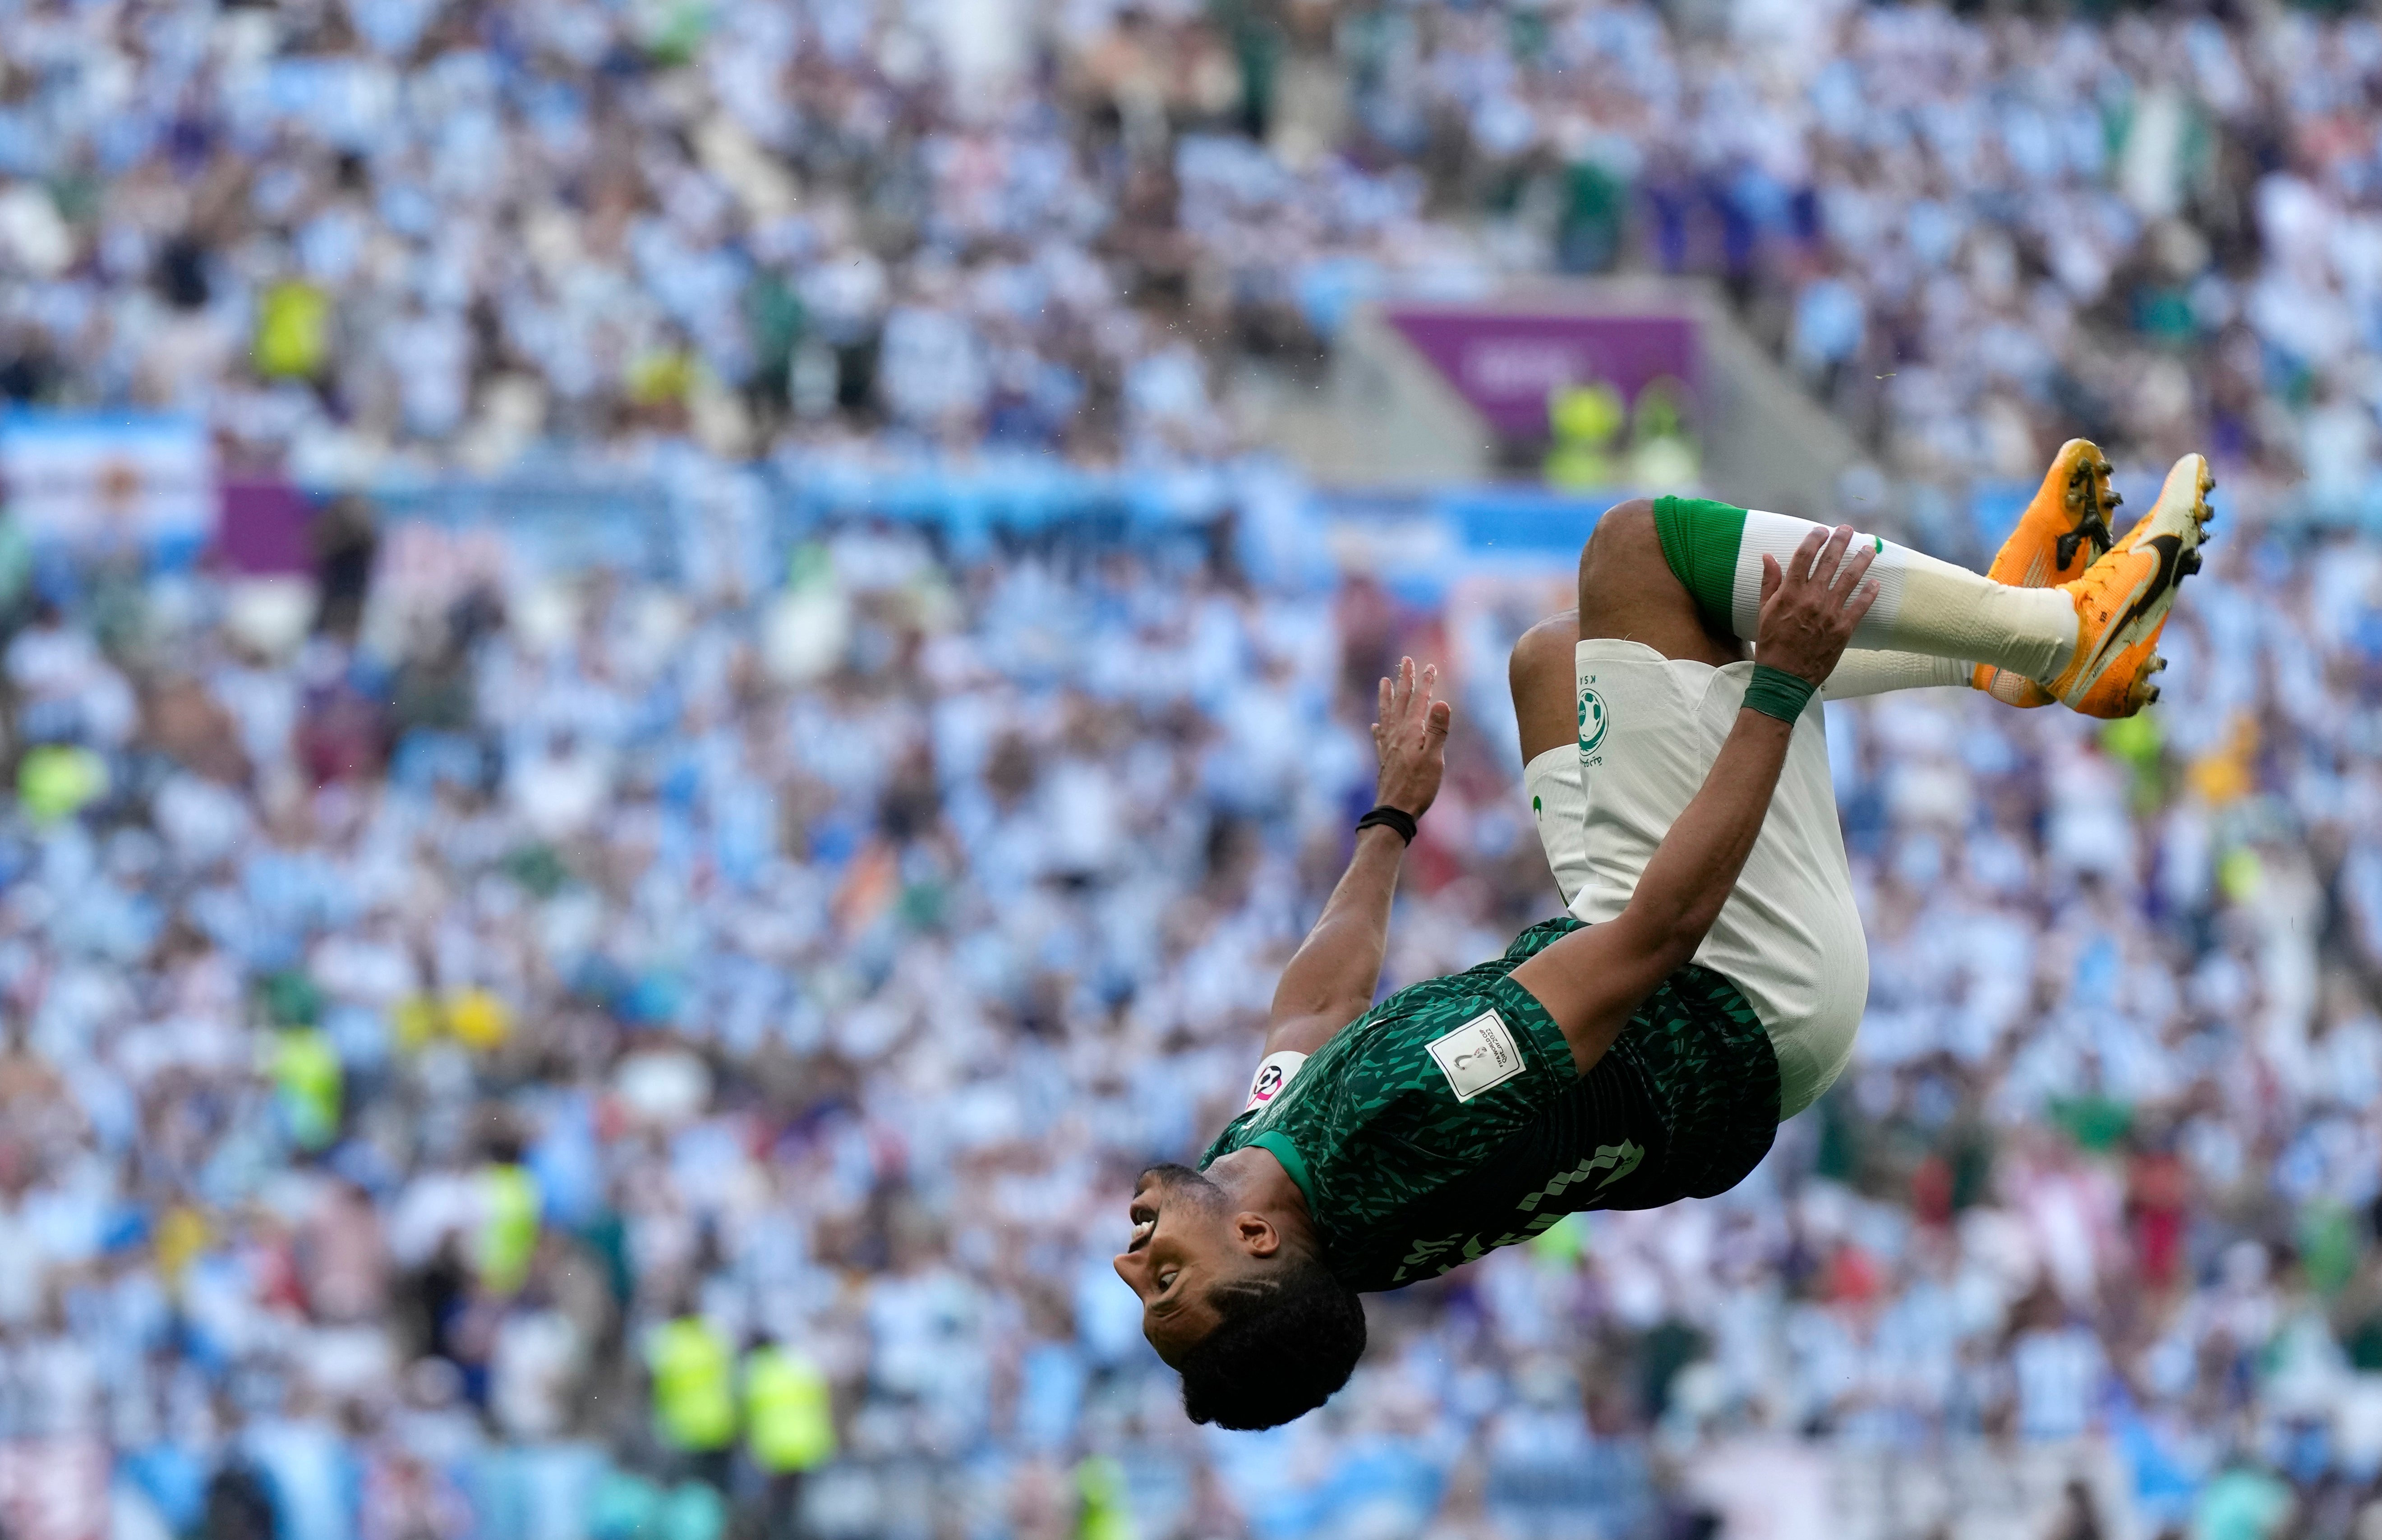 On Tuesday, Saudi Arabia played magnificently and deserved its win over Argentina